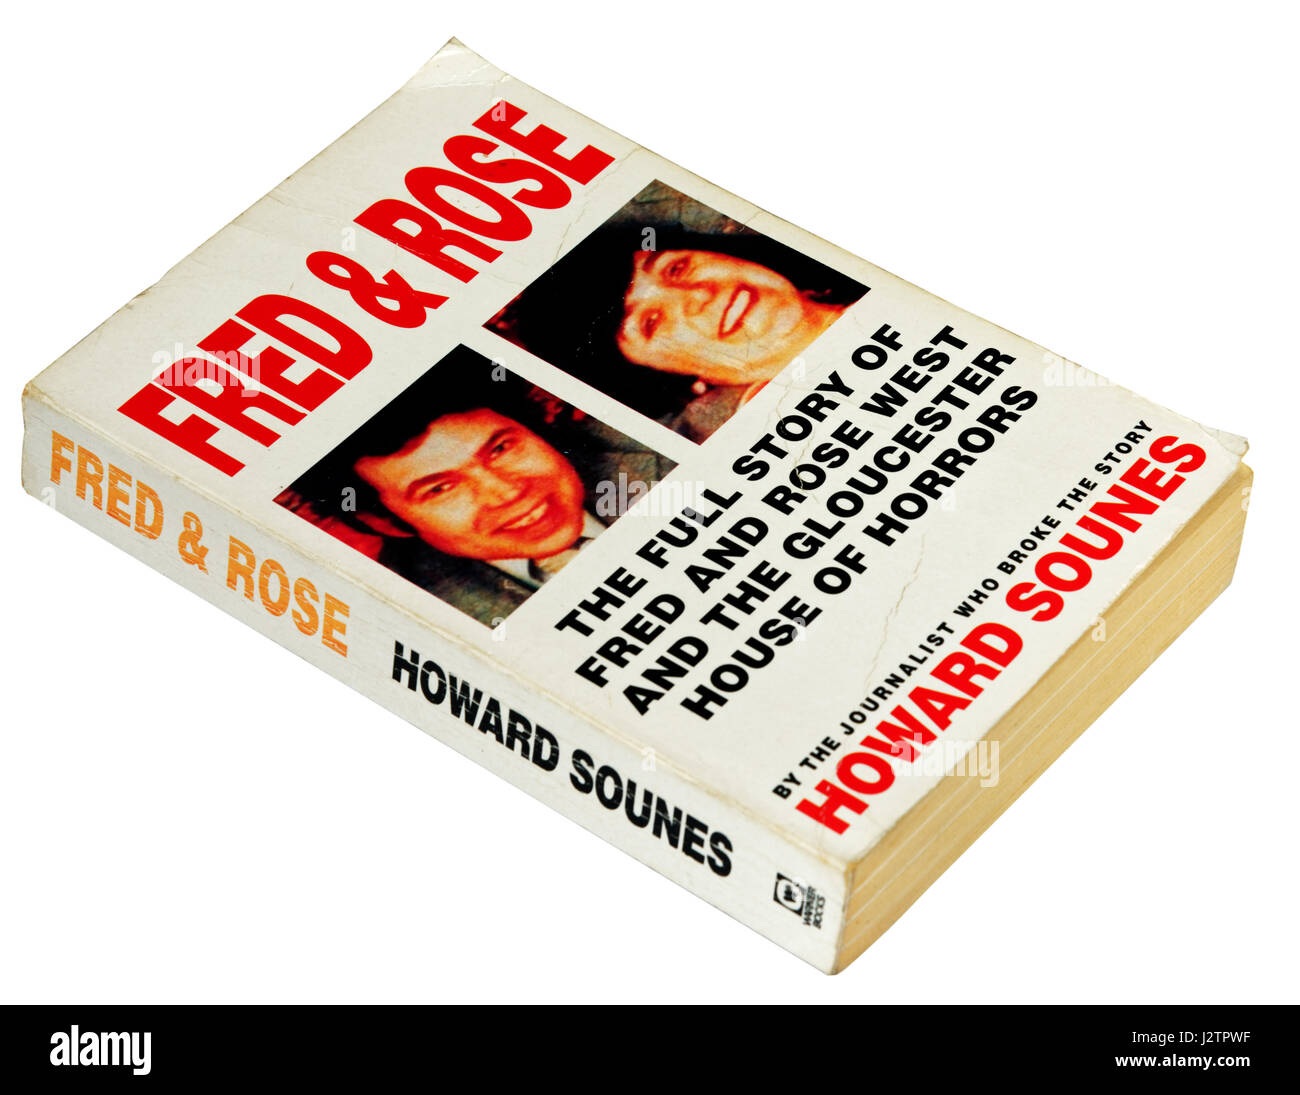 Fred and Rose by Howard Sounes, a book about Fred and Rose West who are among Britain's most notorious criminals. Stock Photo